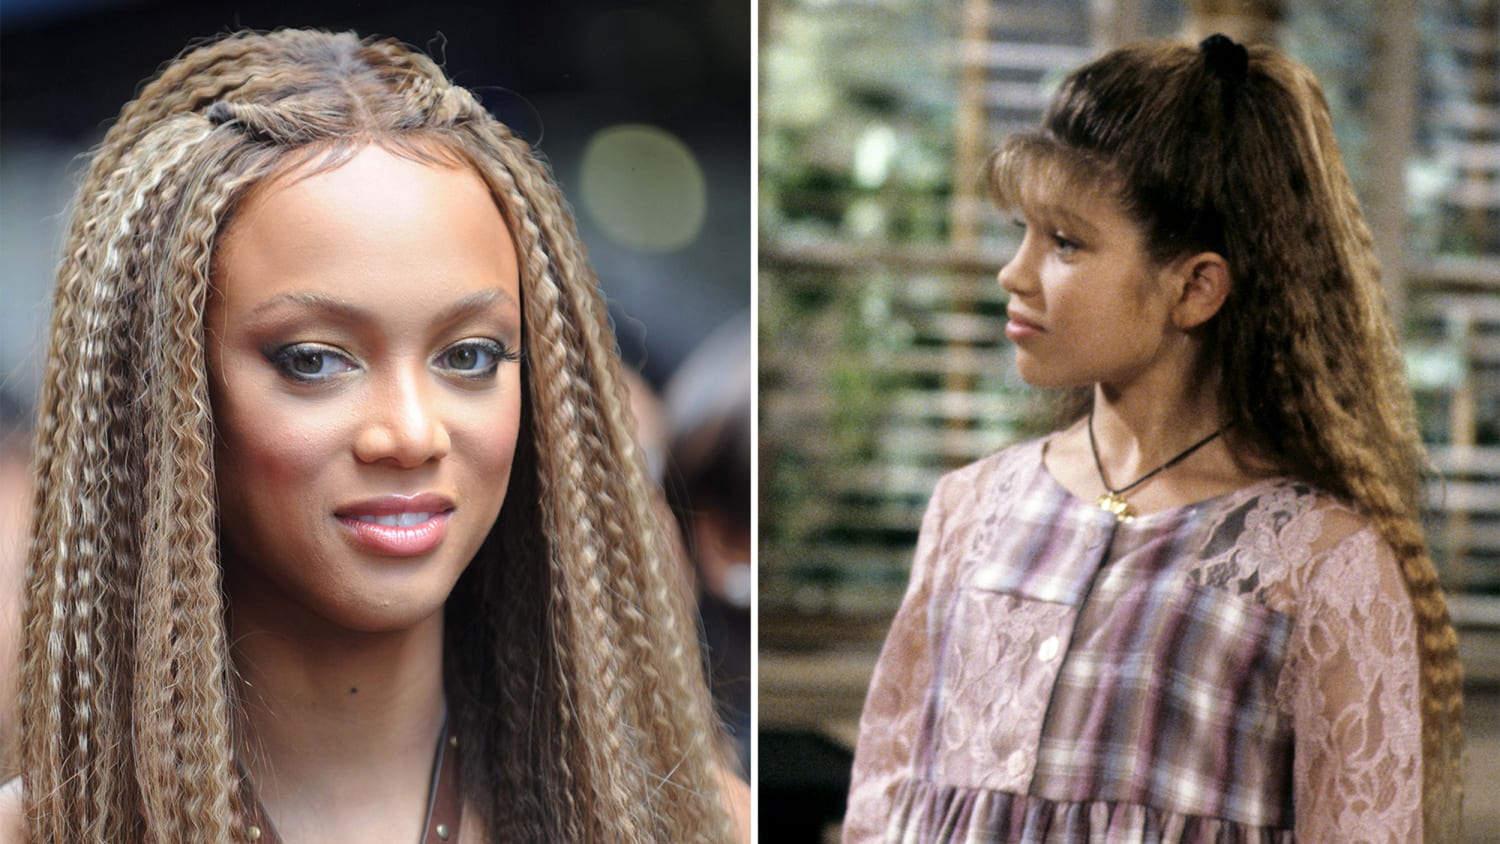 Crimped hair is making a comeback: See the look then and now